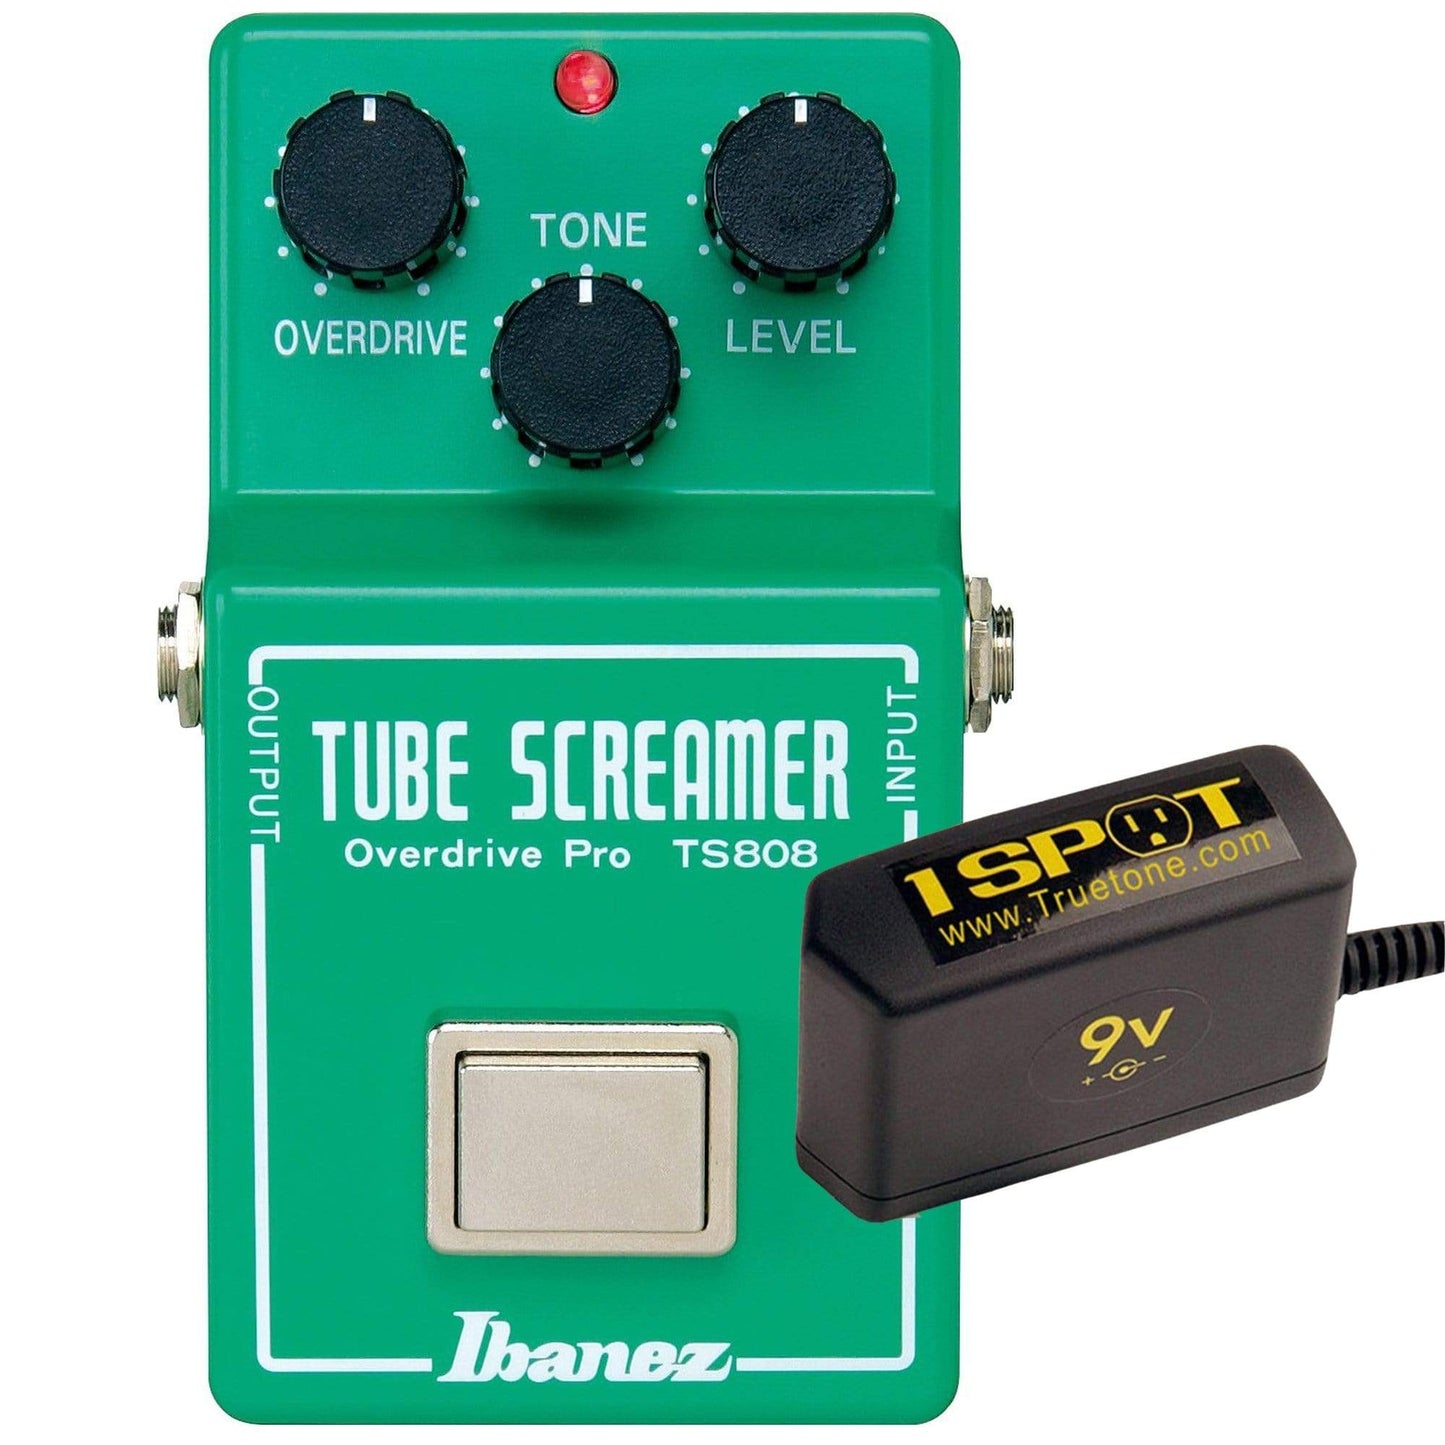 Ibanez TS-808 Tube Screamer Pro Bundle w/ Truetone 1 Spot Space Saving 9v Adapter Effects and Pedals / Overdrive and Boost